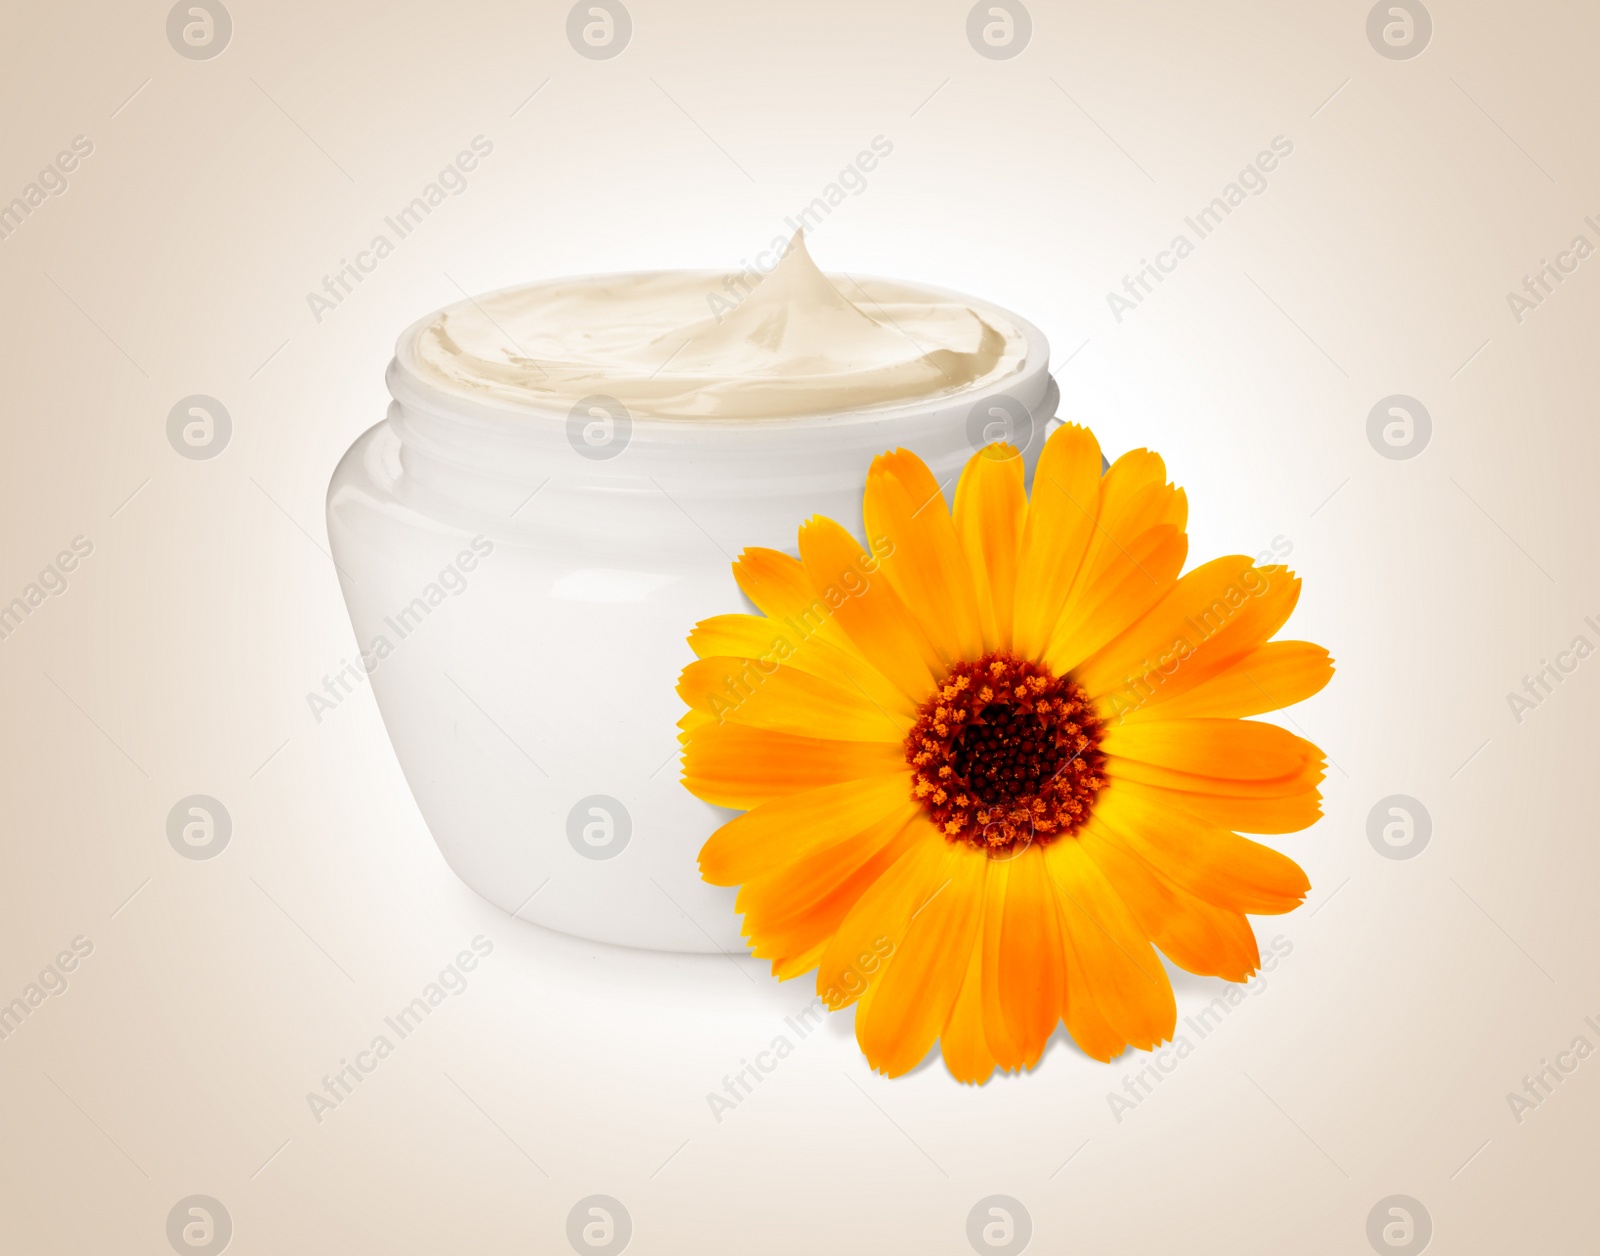 Image of Body cream with calendula extract on light background. Natural based cosmetic product